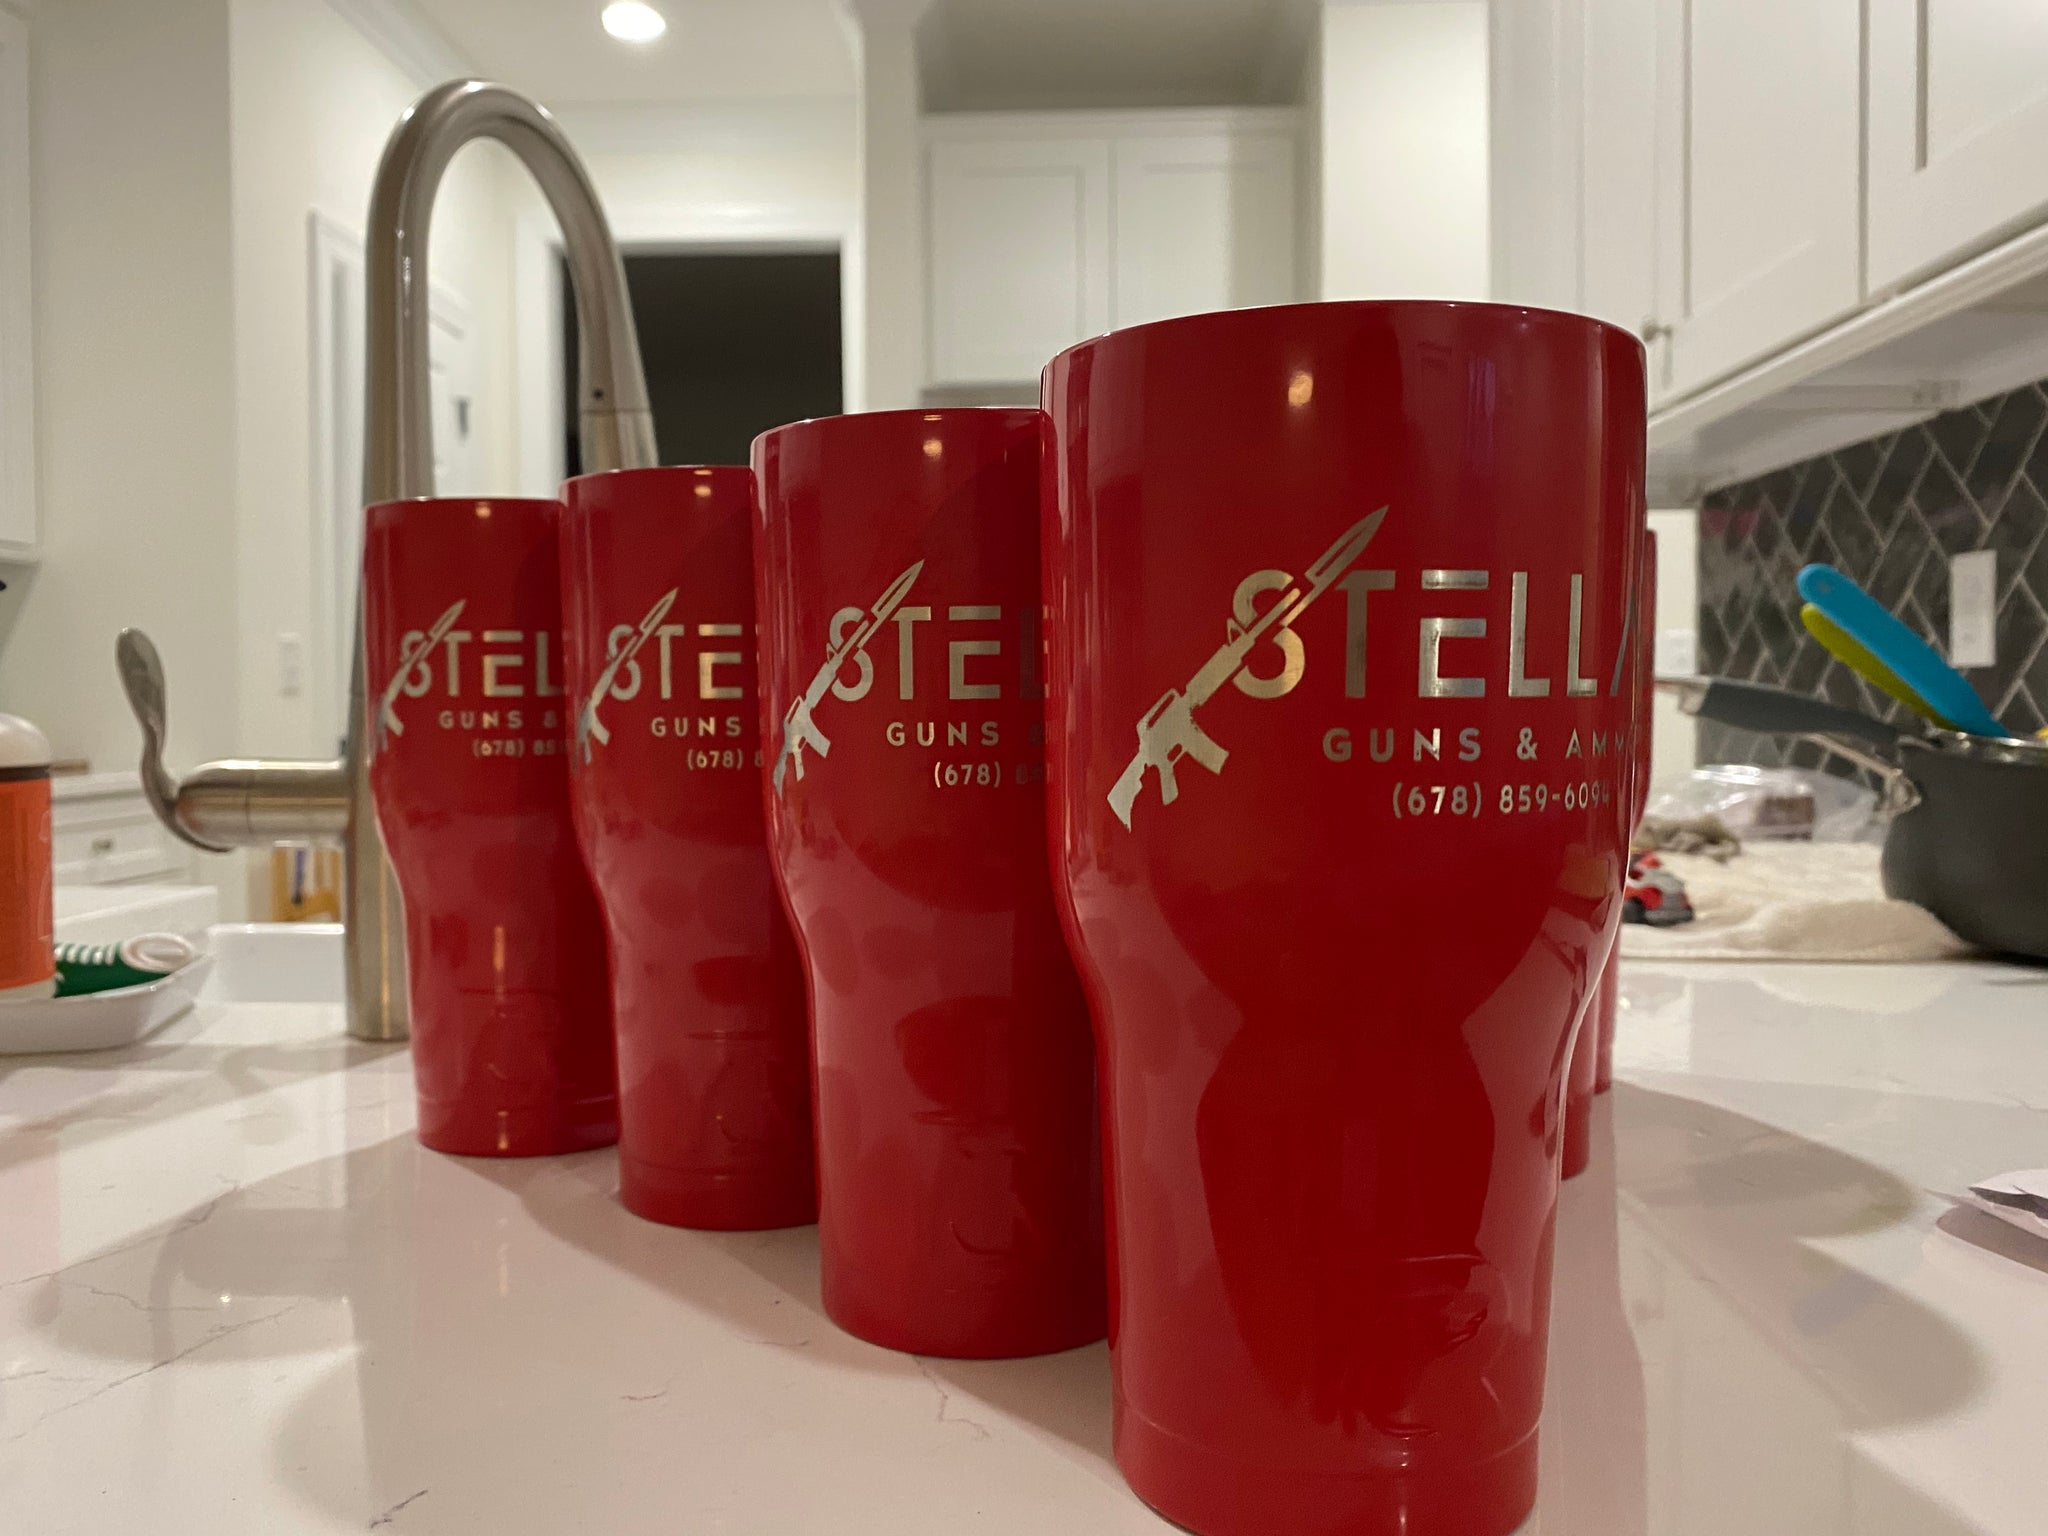 Personalized RTIC 30oz cup, laser engraved